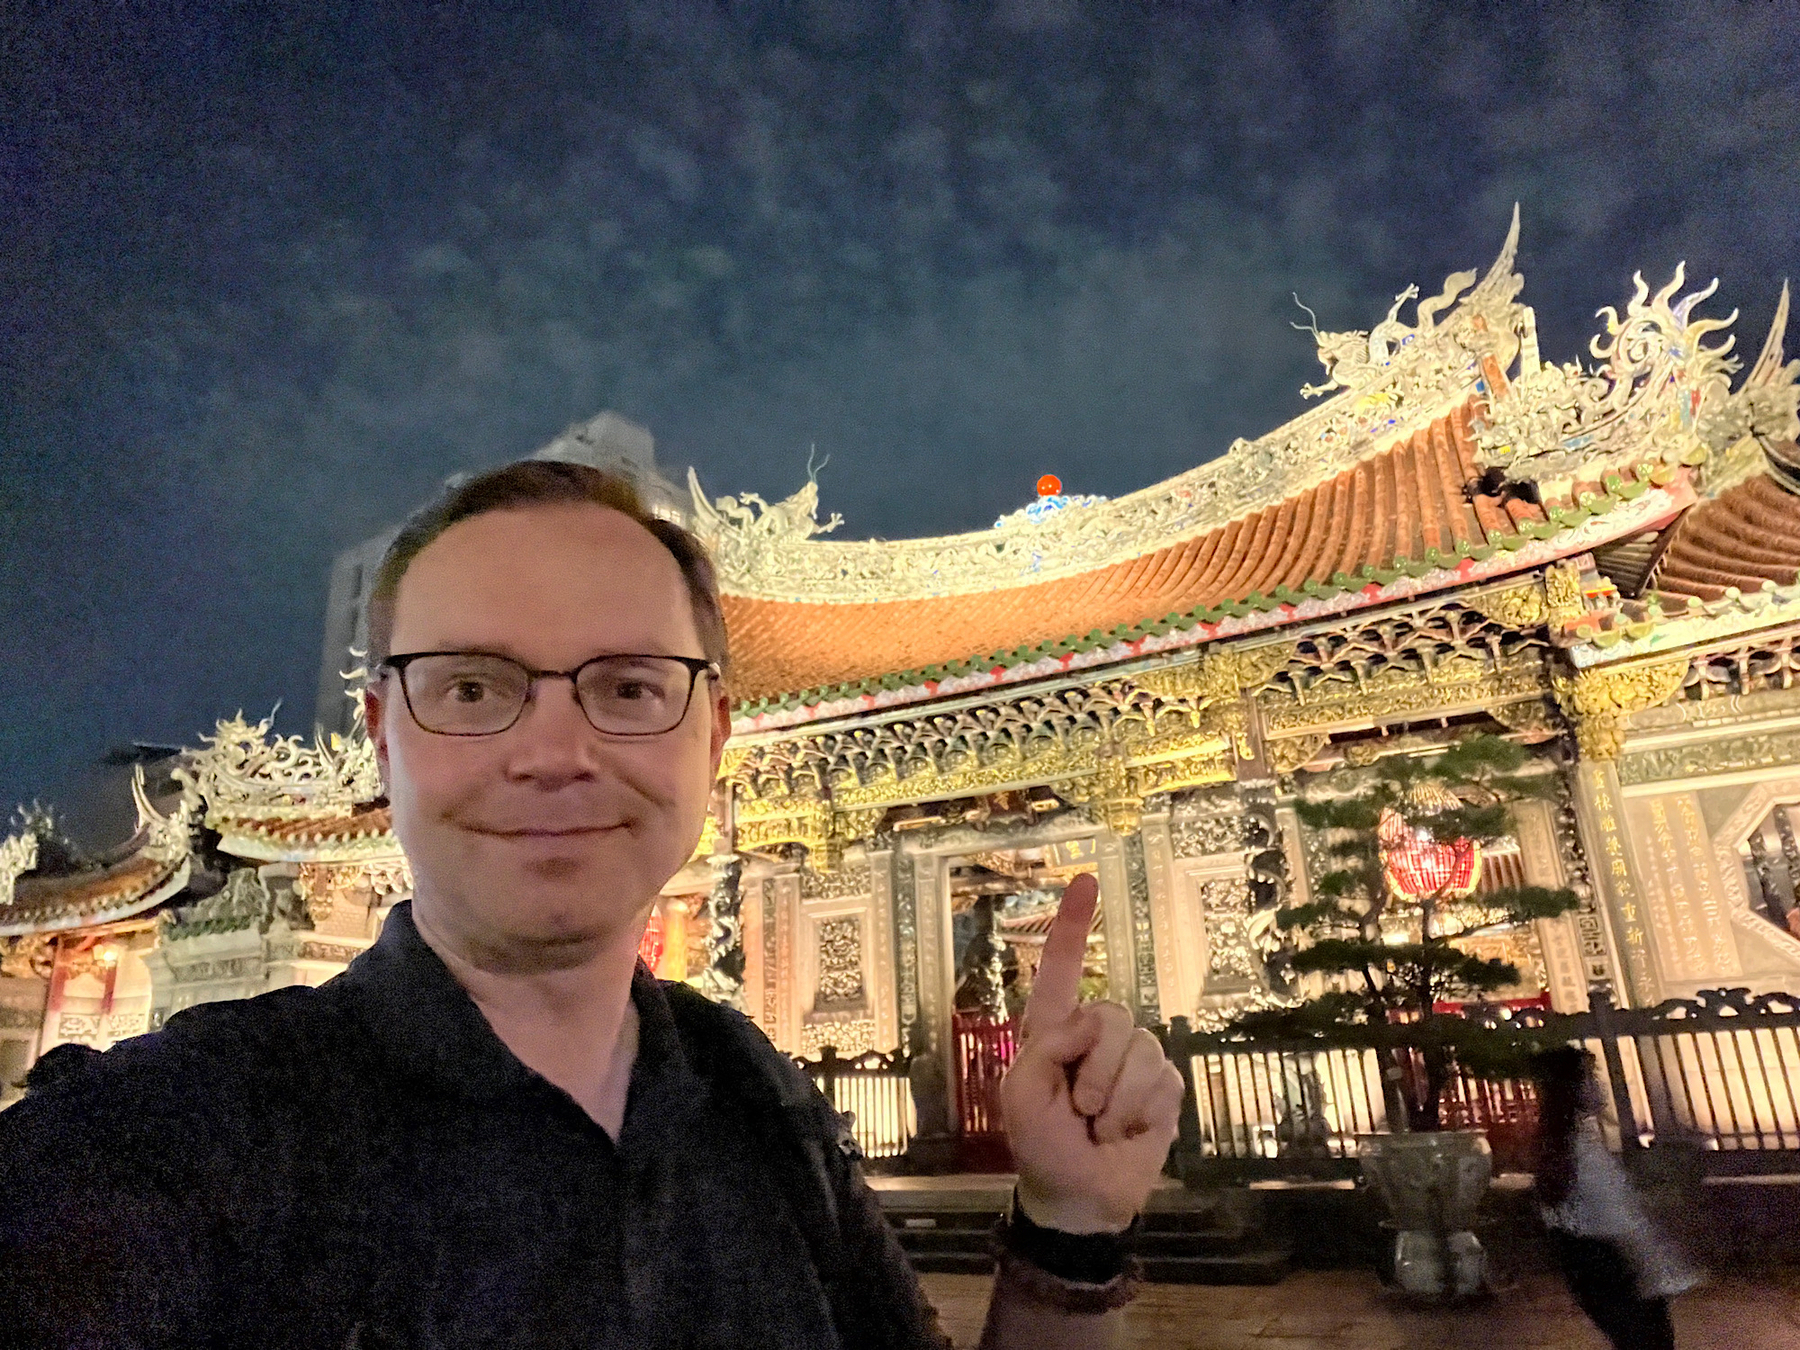 Chad selfie in front of of the lot up Lungshan Temple gates at night